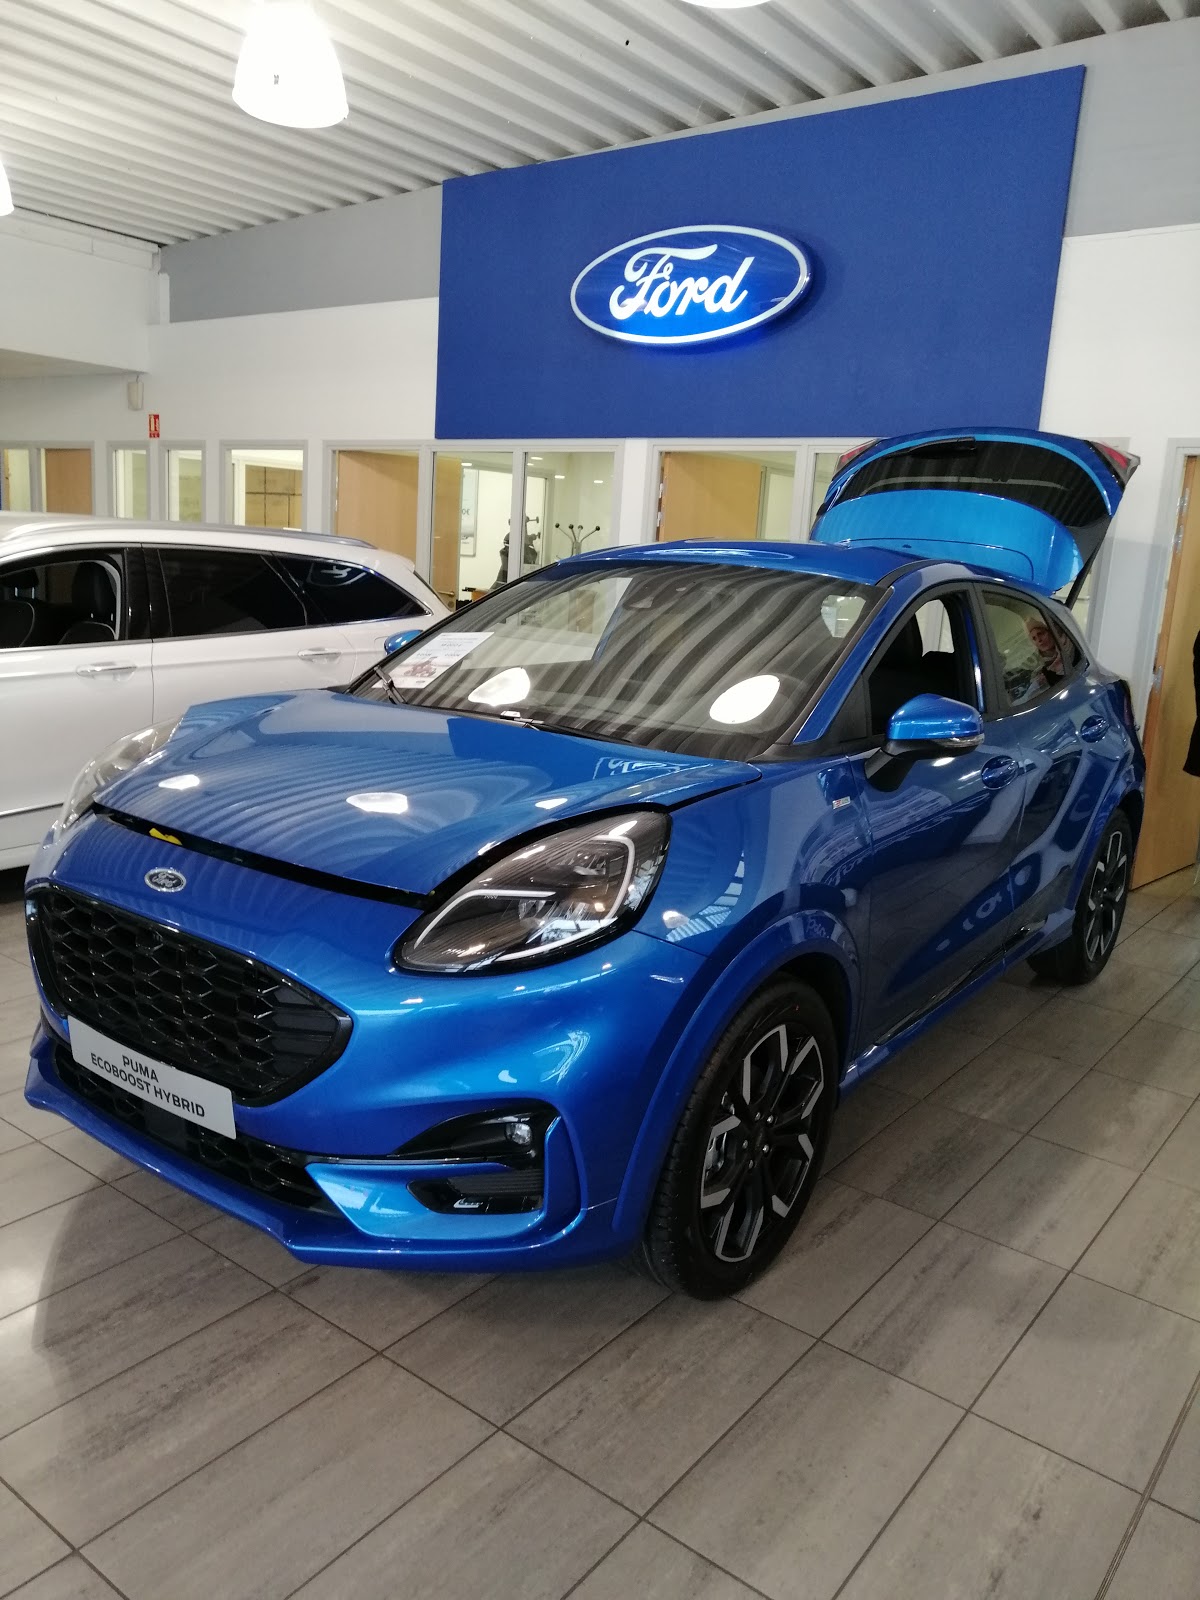 FORD ARMENTIERES - GROUPE DUGARDIN